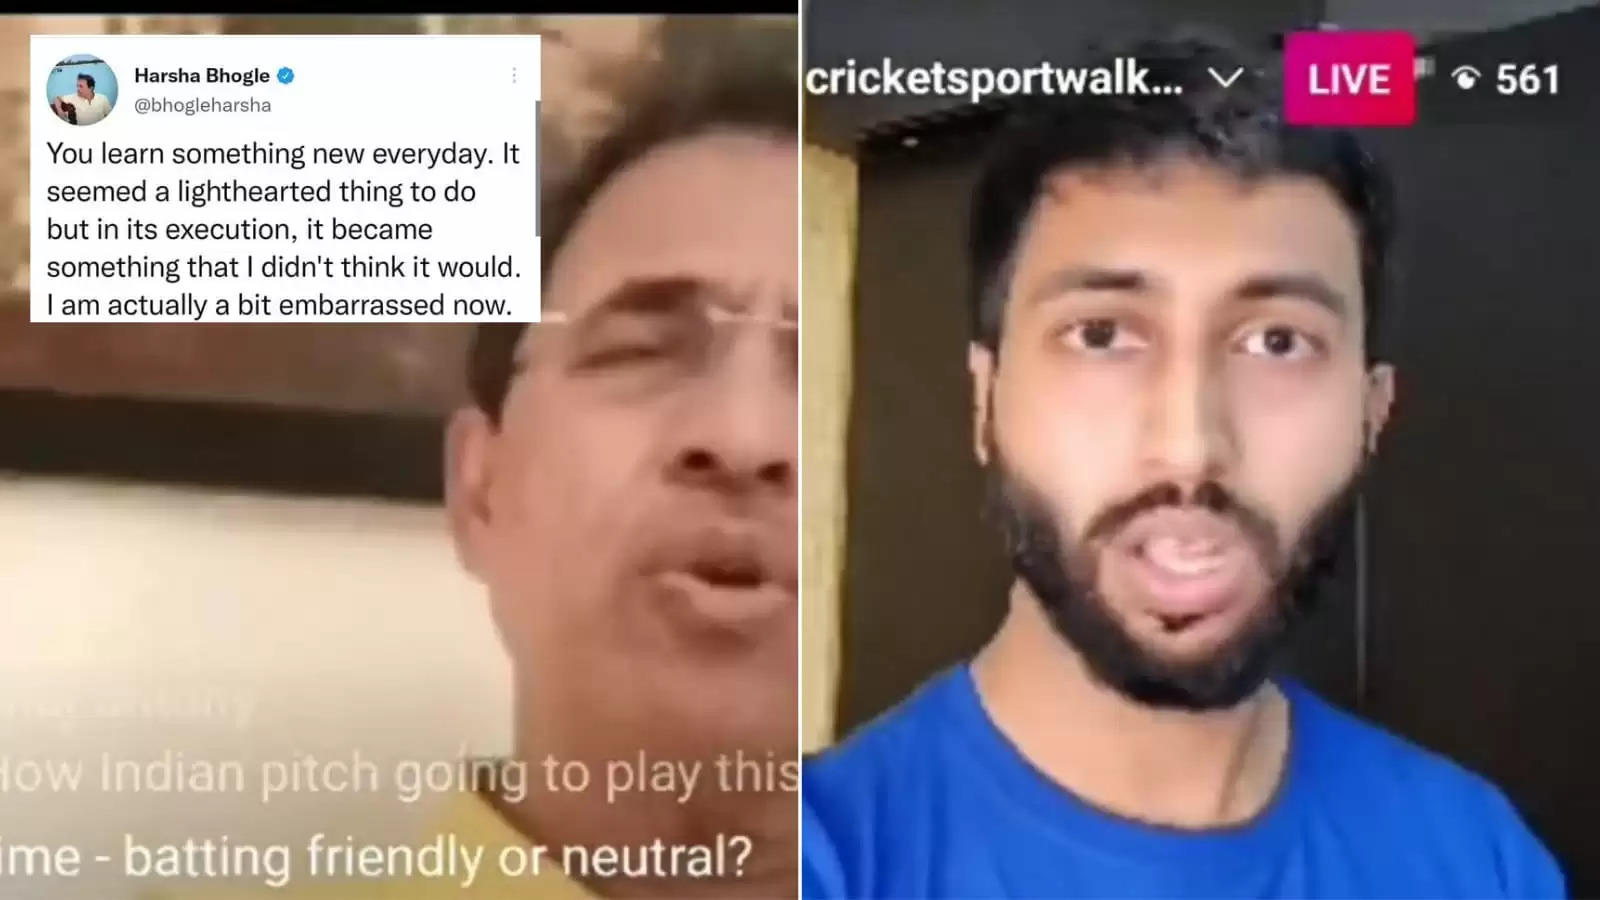 Harsha Bhogle gets serious flak on social media after promo prank goes wrong